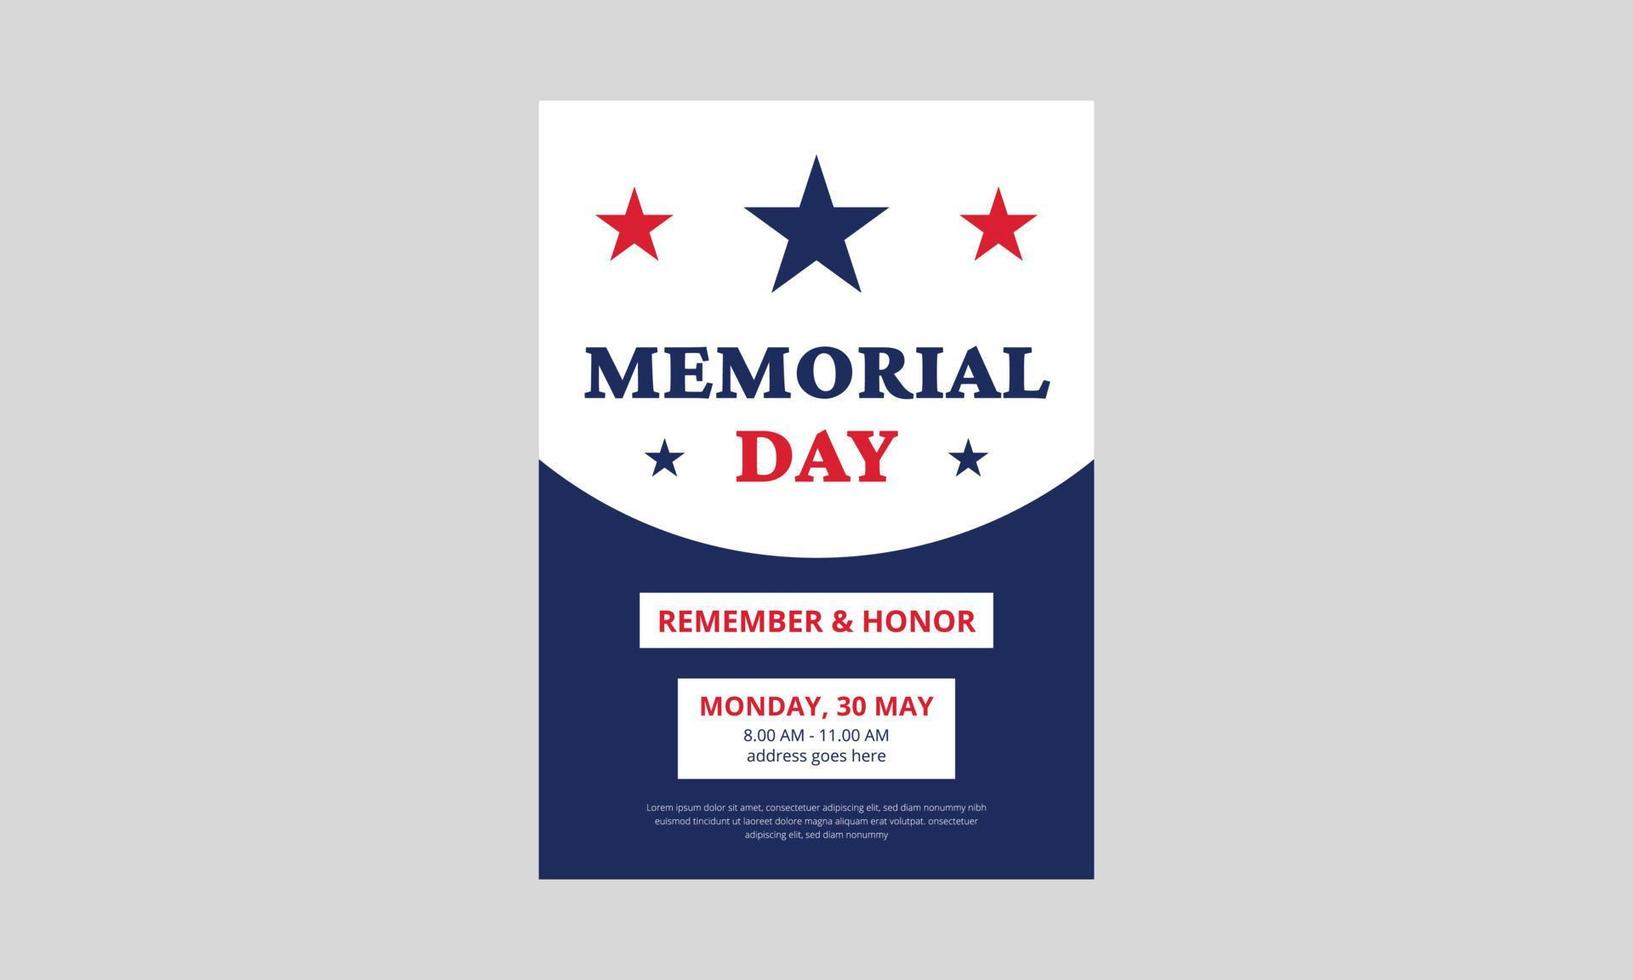 Memorial Day Flyer Template Design. Memorial Day poster templates Vector illustration. USA flag with blue star frame. Cover, A4 Size, Flyer design